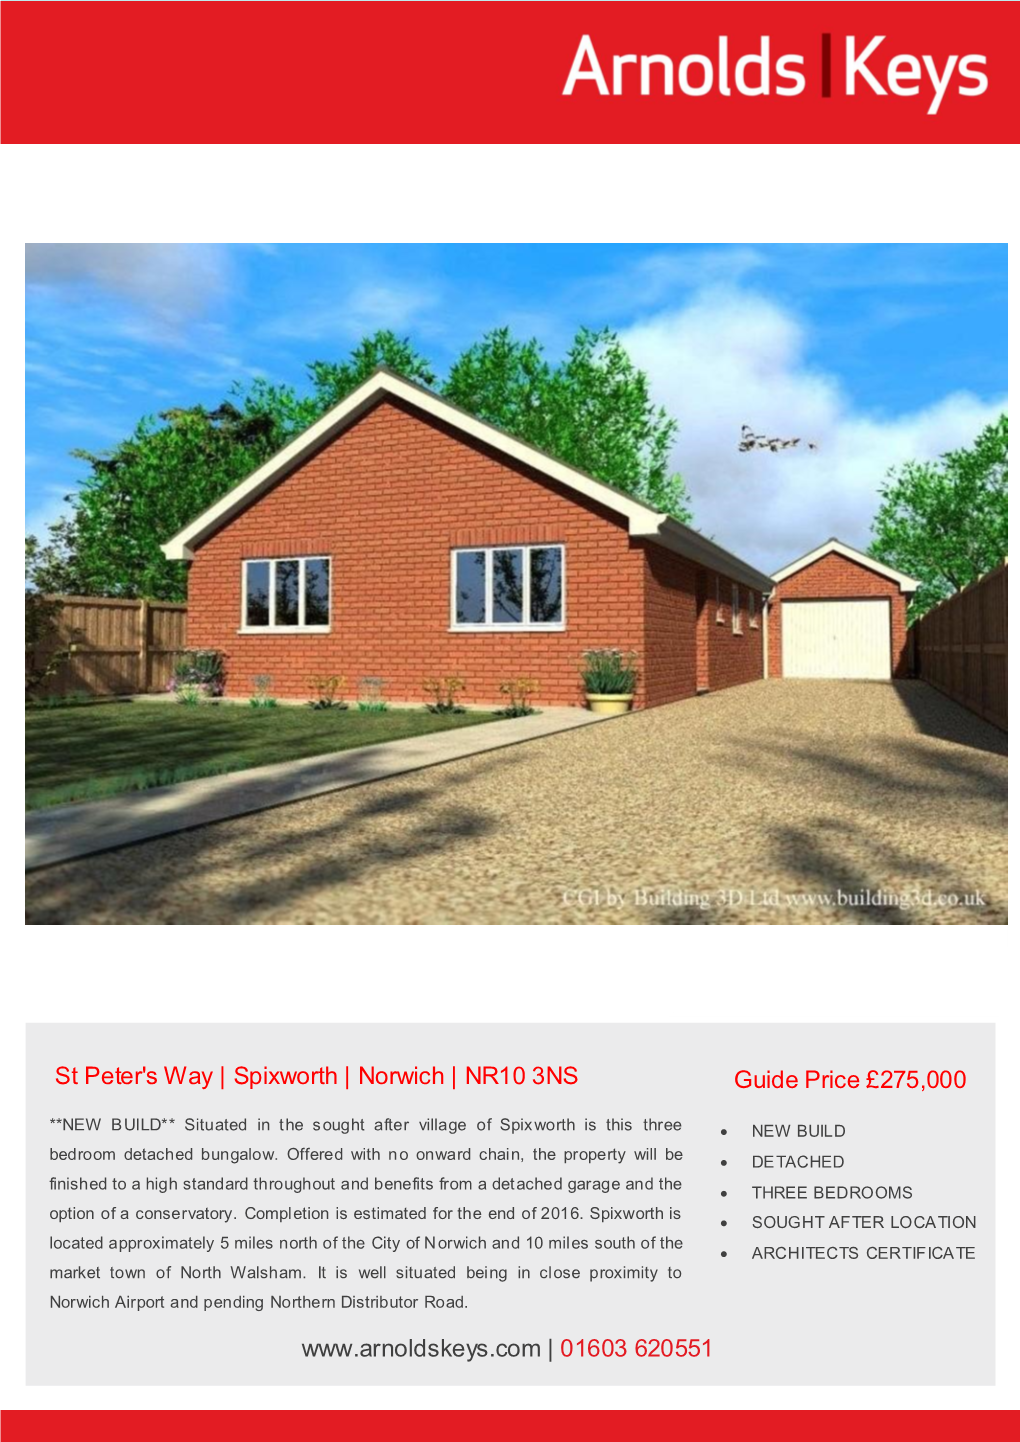 St Peter's Way | Spixworth | Norwich | NR10 3NS Guide Price £275,000